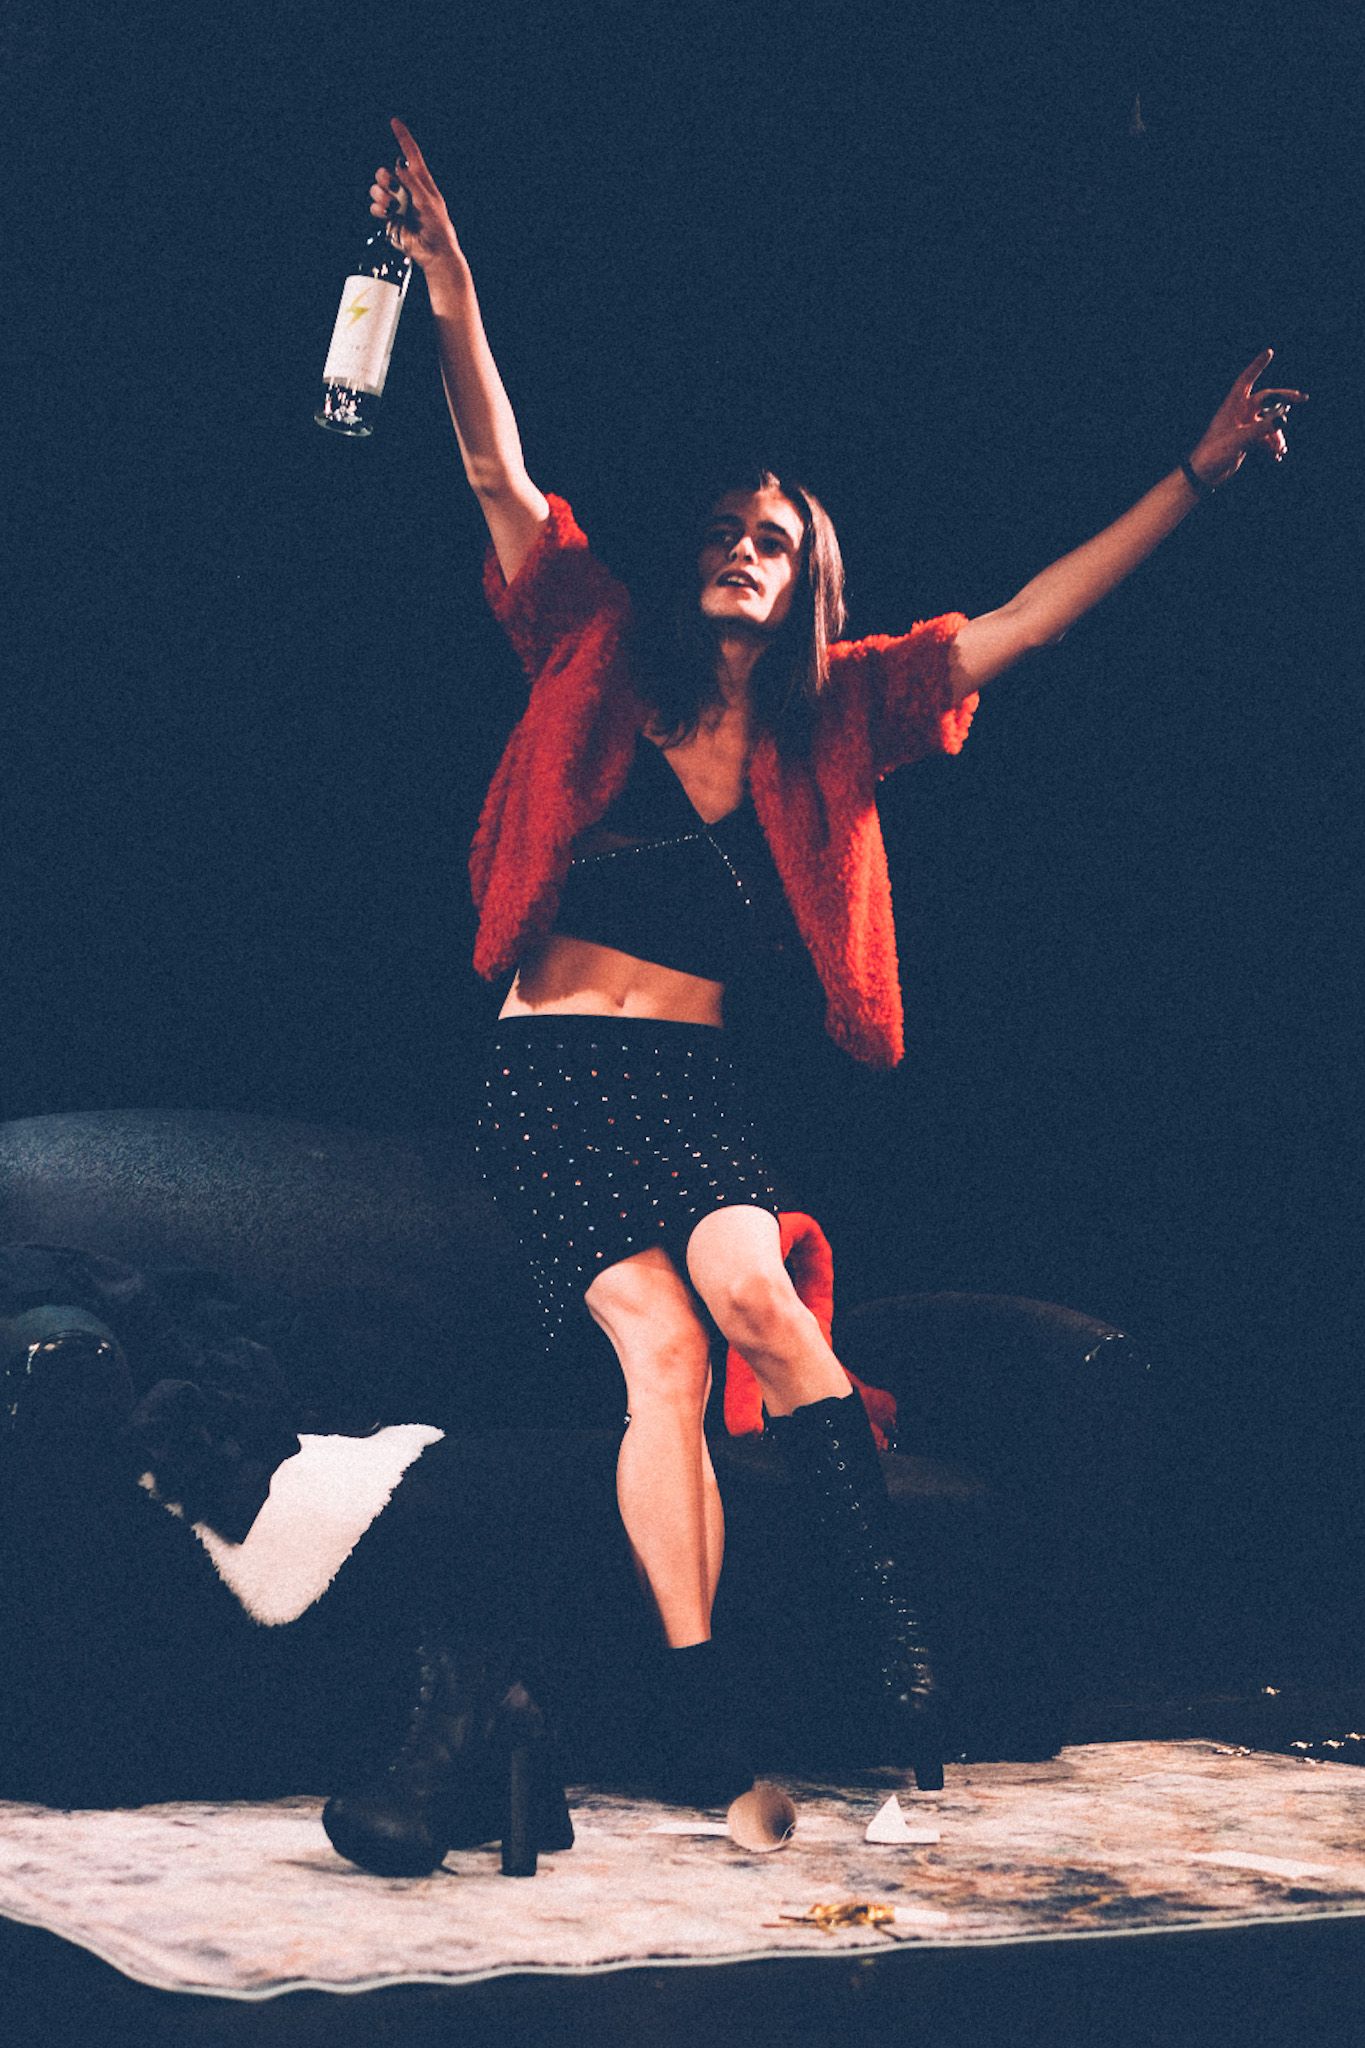 A stage actor is dressed in a black mini skirt and midriff with a furry red jacket and high-heeled boots, sitting on a couch while raising a bottle of vodka in the air.